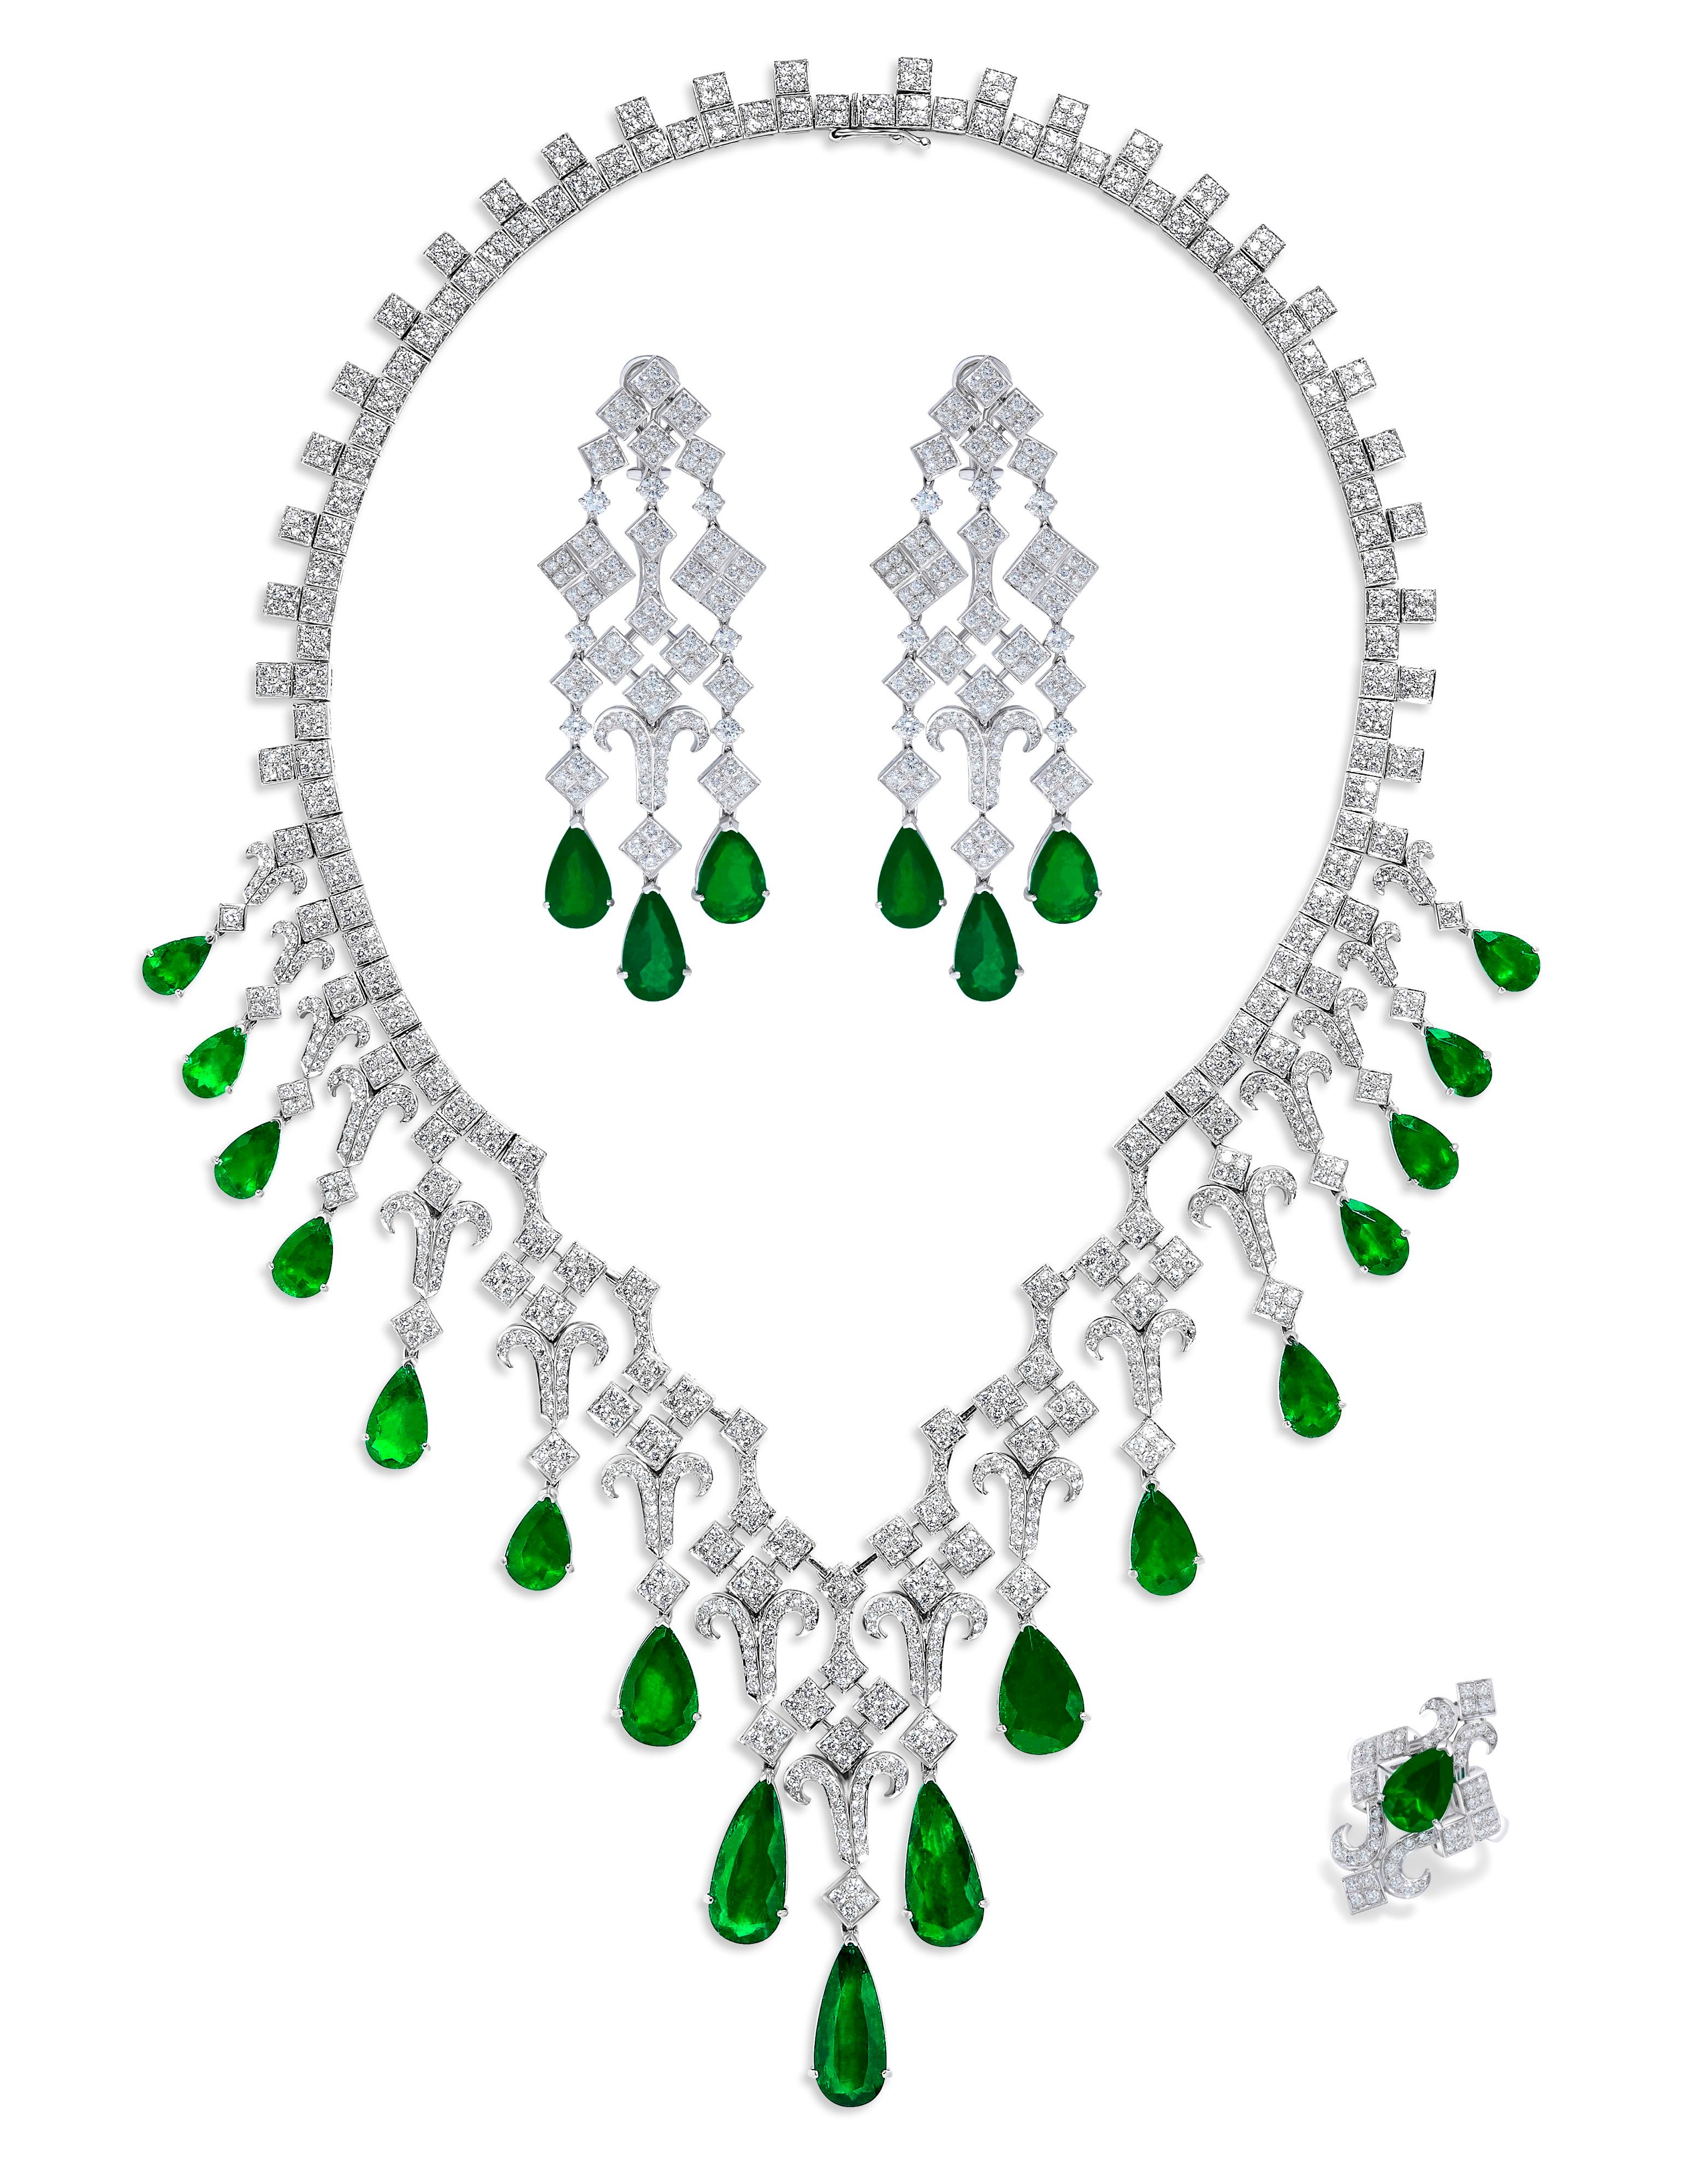 From the Museum vault at Emilio Jewelry, Located On New York’s Iconic Fifth Avenue:
Showcasing a magnificent suite of Vivid green Colombian emeralds with excellent transparency set in a Red carpet suite. 
Total approximate weights: emeralds 69.18ct